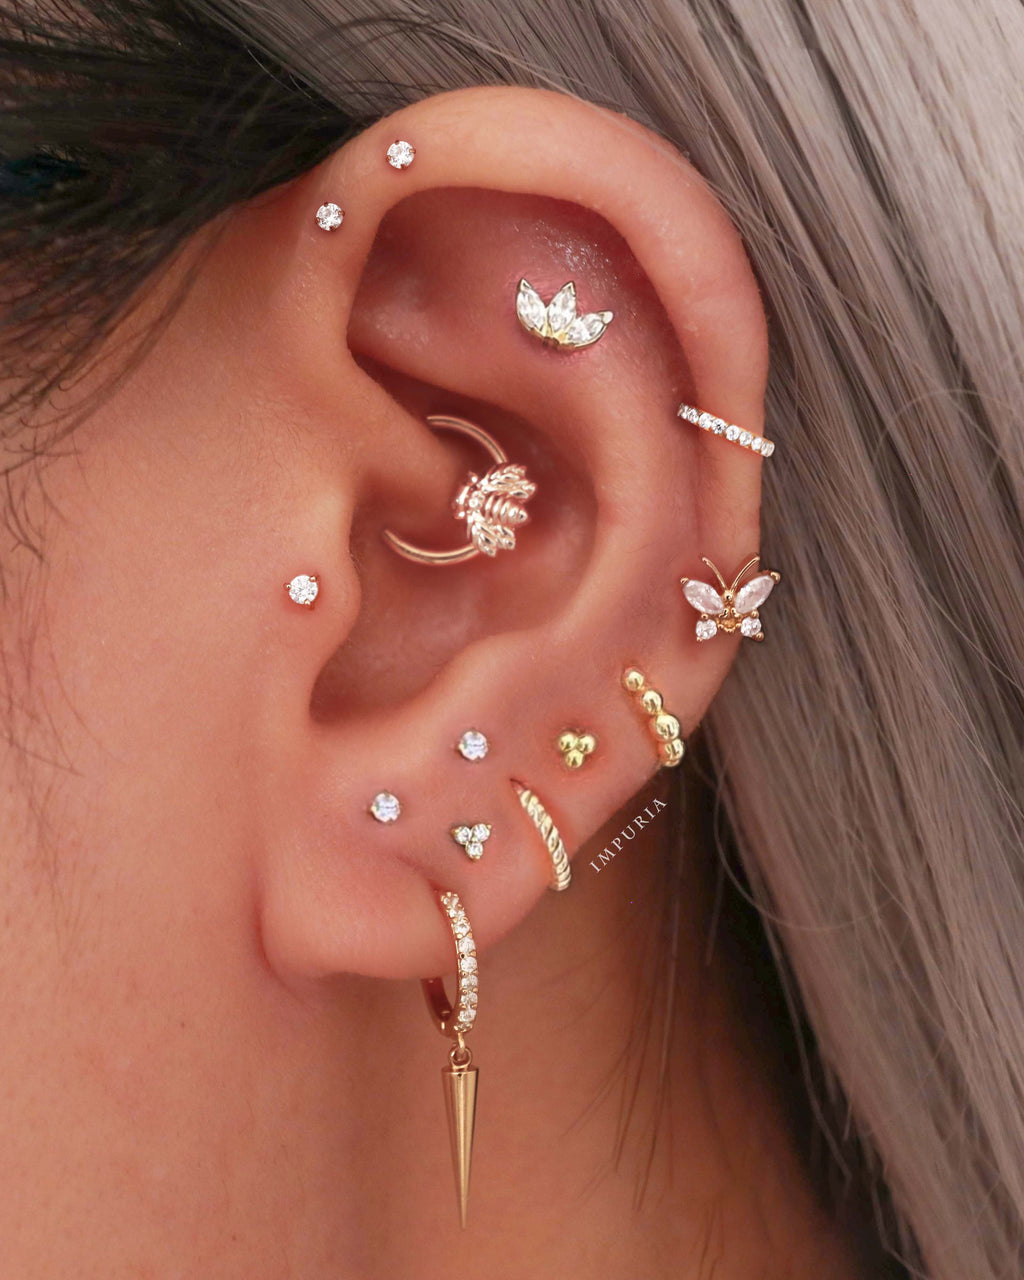 Cartilage Helix Piercing Ring Round Colored Jewelry Ear Hoop Puncture  Zircon | eBay